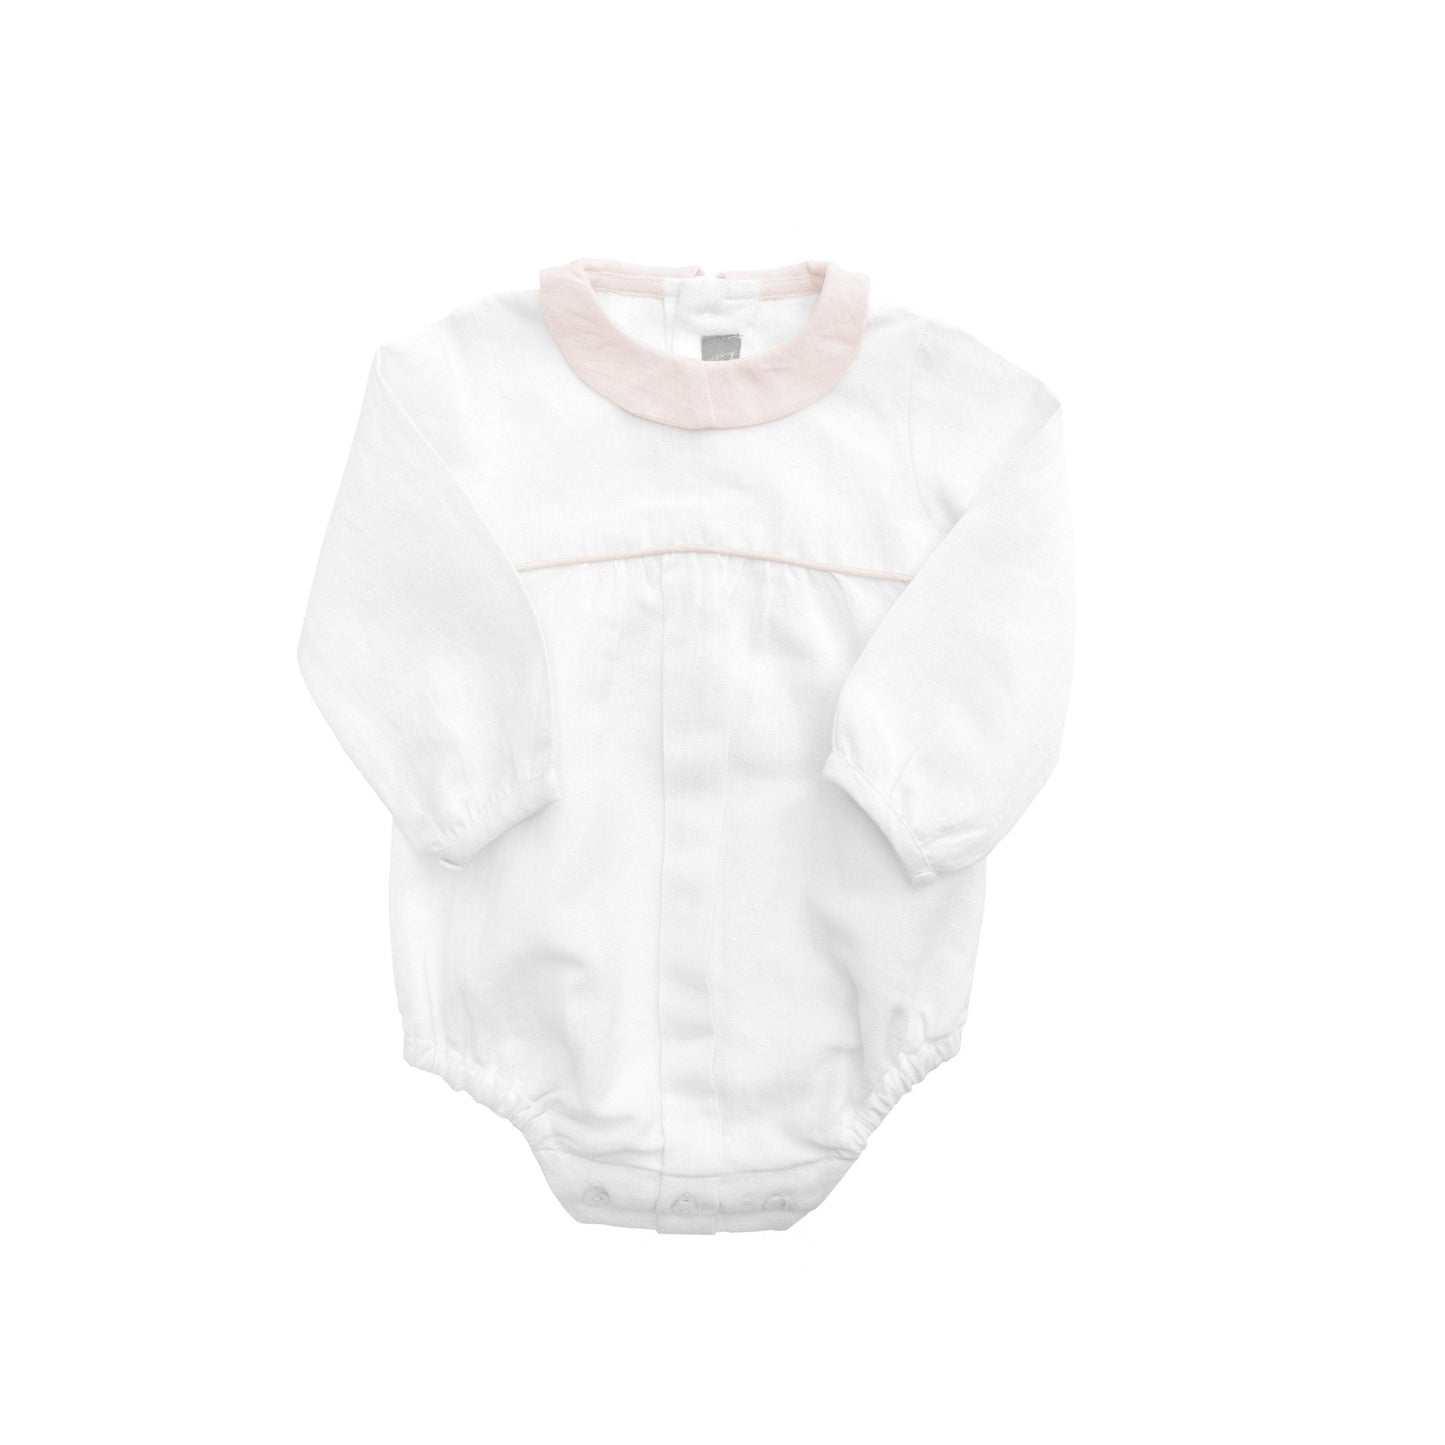 Baby Girl Linen Onesie | Blossom pink - Blissfully Lavender BoutiqueLouelle.